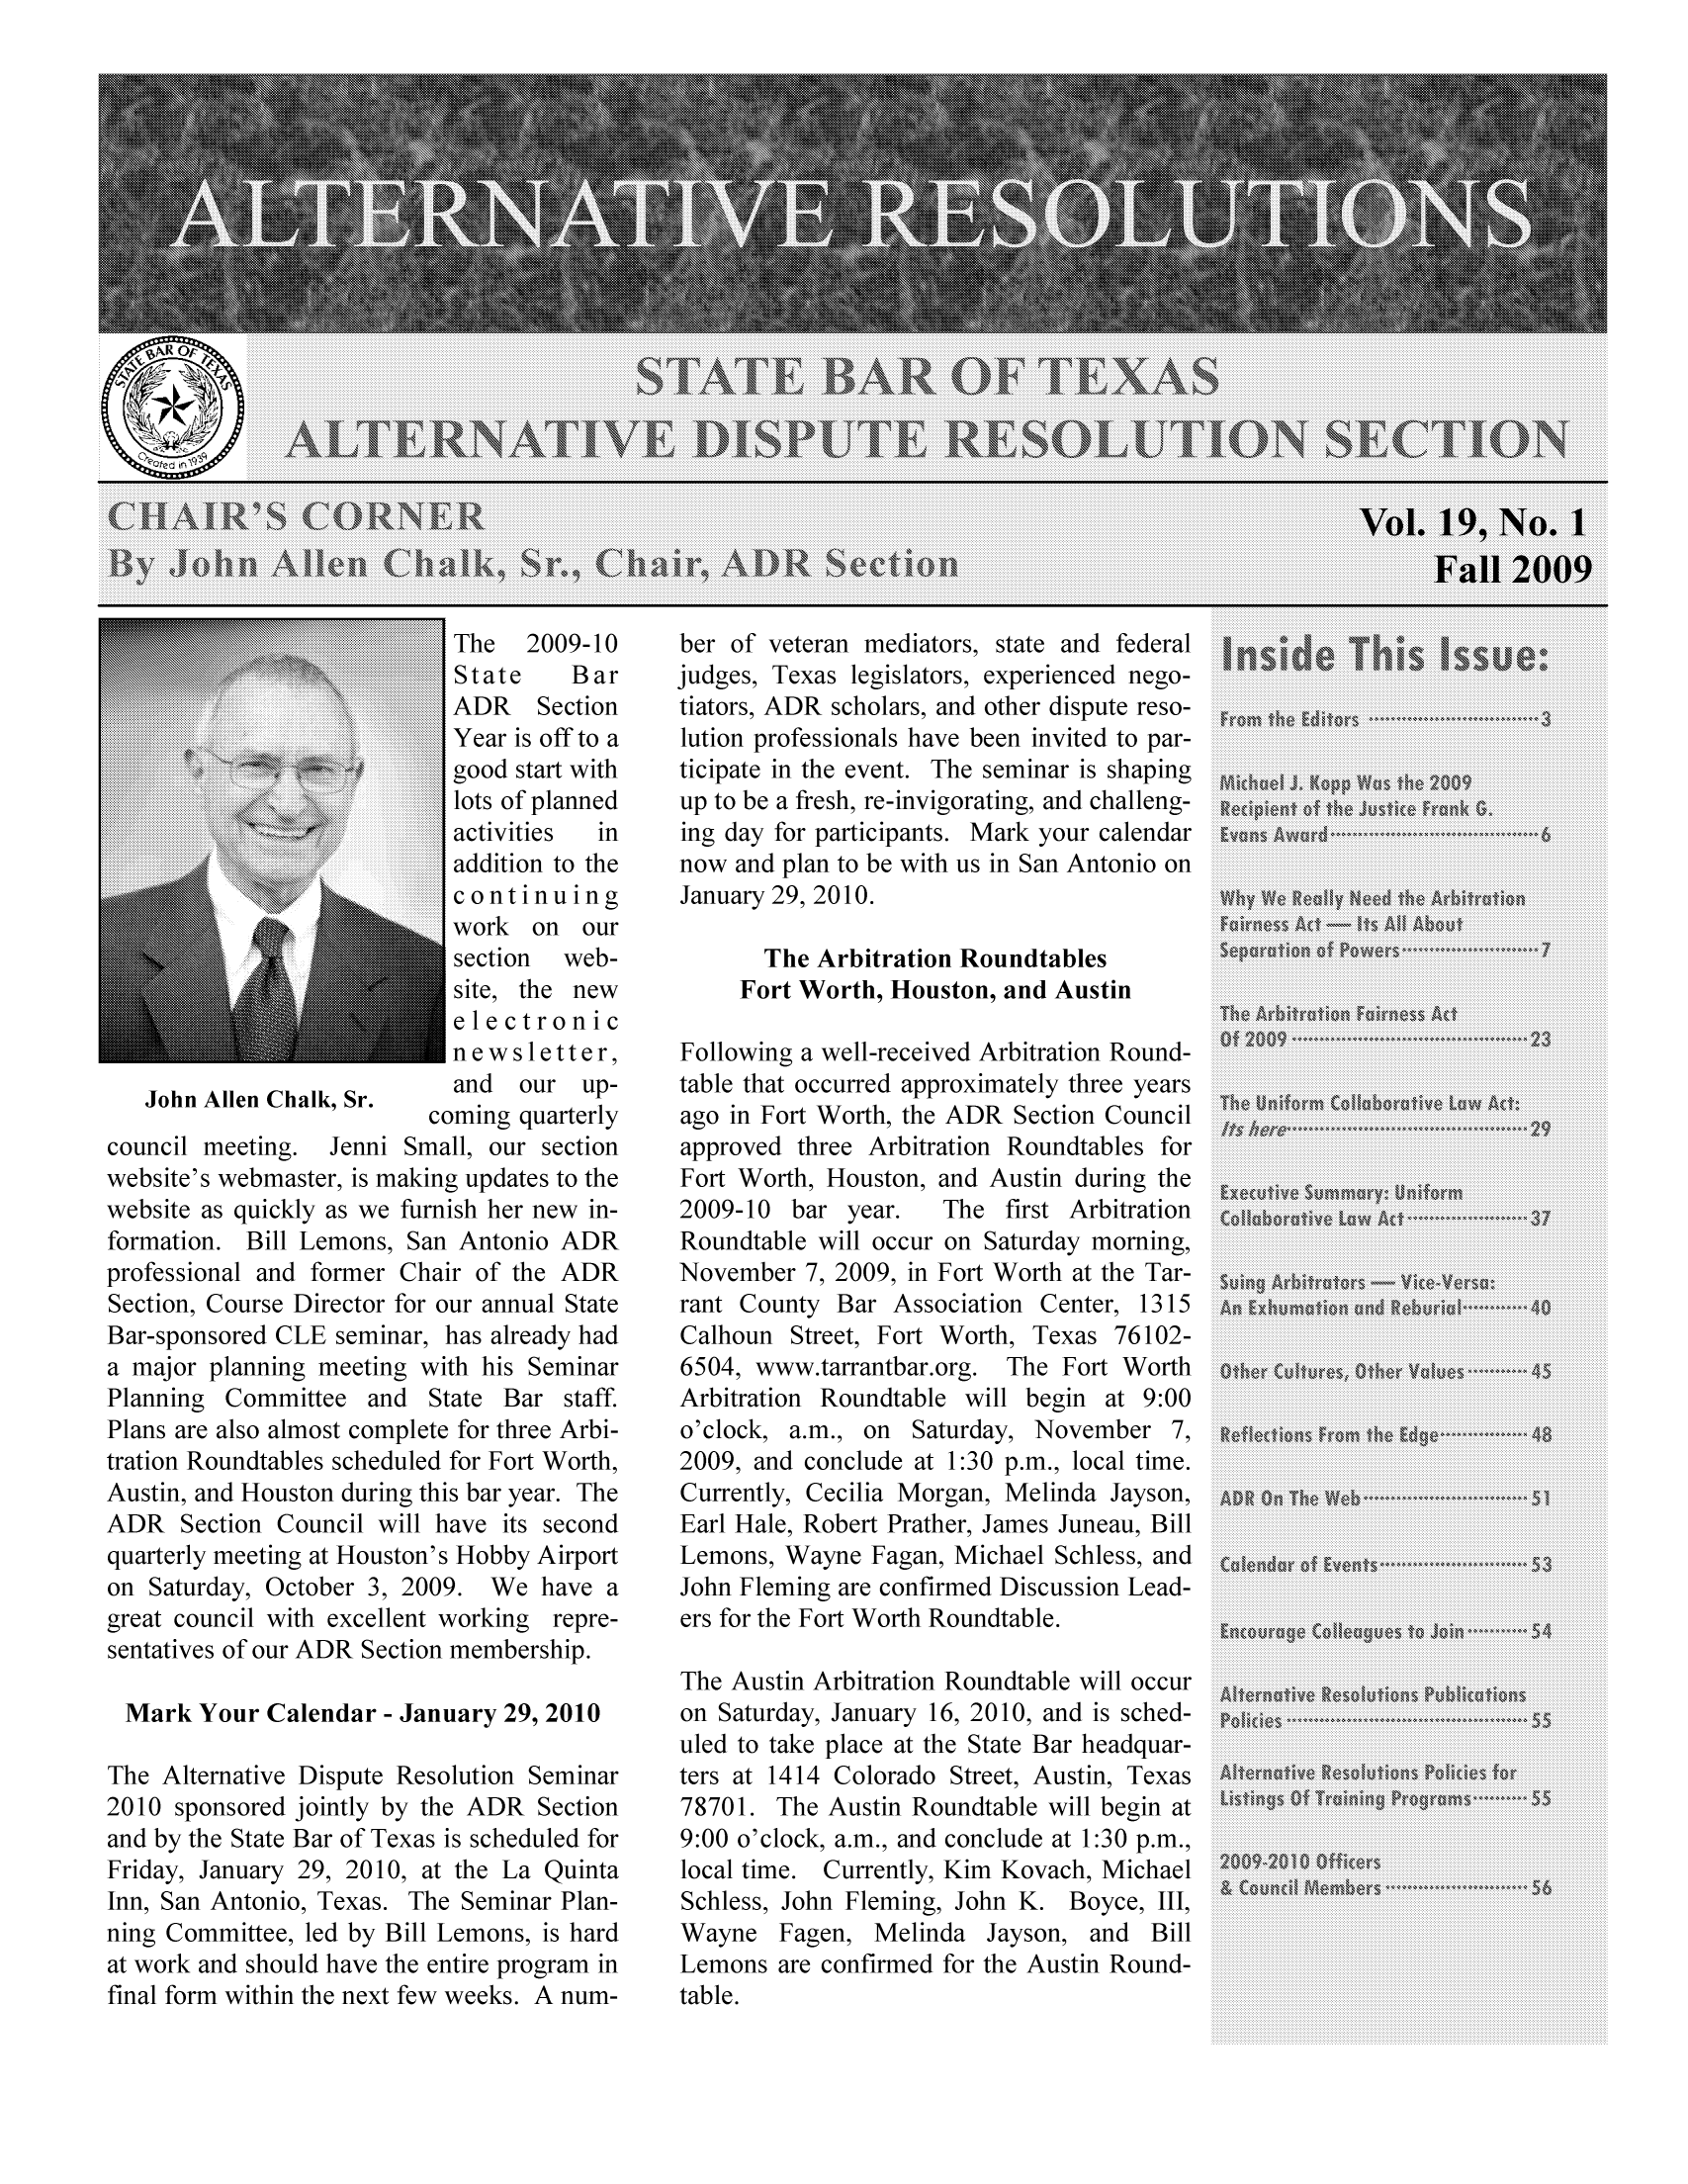 handle is hein.barjournals/altresolut0019 and id is 1 raw text is: The 2009-10
State    Bar
ADR Section
Year is off to a
good start with
......... lots of planned
':' :::':':':':addition  to  the
continuing
work on our
section web-
site, the new
electronic
newsletter,
John Allen Chalk, Sr.   an   ou   up
coming quarterly
council meeting. Jenni Small, our section
website's webmaster, is making updates to the
website as quickly as we furnish her new in-
formation. Bill Lemons, San Antonio ADR
professional and former Chair of the ADR
Section, Course Director for our annual State
Bar-sponsored CLE seminar, has already had
a major planning meeting with his Seminar
Planning Committee and State Bar staff.
Plans are also almost complete for three Arbi-
tration Roundtables scheduled for Fort Worth,
Austin, and Houston during this bar year. The
ADR Section Council will have its second
quarterly meeting at Houston's Hobby Airport
on Saturday, October 3, 2009. We have a
great council with excellent working repre-
sentatives of our ADR Section membership.
Mark Your Calendar - January 29, 2010
The Alternative Dispute Resolution Seminar
2010 sponsored jointly by the ADR Section
and by the State Bar of Texas is scheduled for
Friday, January 29, 2010, at the La Quinta
Inn, San Antonio, Texas. The Seminar Plan-
ning Committee, led by Bill Lemons, is hard
at work and should have the entire program in
final form within the next few weeks. A num-

ber of veteran mediators, state and federal
judges, Texas legislators, experienced nego-
tiators, ADR scholars, and other dispute reso-
lution professionals have been invited to par-
ticipate in the event. The seminar is shaping
up to be a fresh, re-invigorating, and challeng-
ing day for participants. Mark your calendar
now and plan to be with us in San Antonio on
January 29, 2010.

The Arbitration Roundtables
Fort Worth, Houston, and Austin

Following a well-received Arbitration Round-
table that occurred approximately three years
ago in Fort Worth, the ADR Section Council
approved three Arbitration Roundtables for
Fort Worth, Houston, and Austin during the
2009-10 bar year.   The first Arbitration
Roundtable will occur on Saturday morning,
November 7, 2009, in Fort Worth at the Tar-
rant County Bar Association Center, 1315
Calhoun Street, Fort Worth, Texas 76102-
6504, www.tarrantbar.org. The Fort Worth
Arbitration Roundtable will begin at 9:00
o'clock, a.m., on Saturday, November 7,
2009, and conclude at 1:30 p.m., local time.
Currently, Cecilia Morgan, Melinda Jayson,
Earl Hale, Robert Prather, James Juneau, Bill
Lemons, Wayne Fagan, Michael Schless, and
John Fleming are confirmed Discussion Lead-
ers for the Fort Worth Roundtable.
The Austin Arbitration Roundtable will occur
on Saturday, January 16, 2010, and is sched-
uled to take place at the State Bar headquar-
ters at 1414 Colorado Street, Austin, Texas
78701. The Austin Roundtable will begin at
9:00 o'clock, a.m., and conclude at 1:30 p.m.,
local time. Currently, Kim Kovach, Michael
Schless, John Fleming, John K. Boyce, I1,
Wayne Fagen, Melinda Jayson, and Bill
Lemons are confirmed for the Austin Round-
table.


